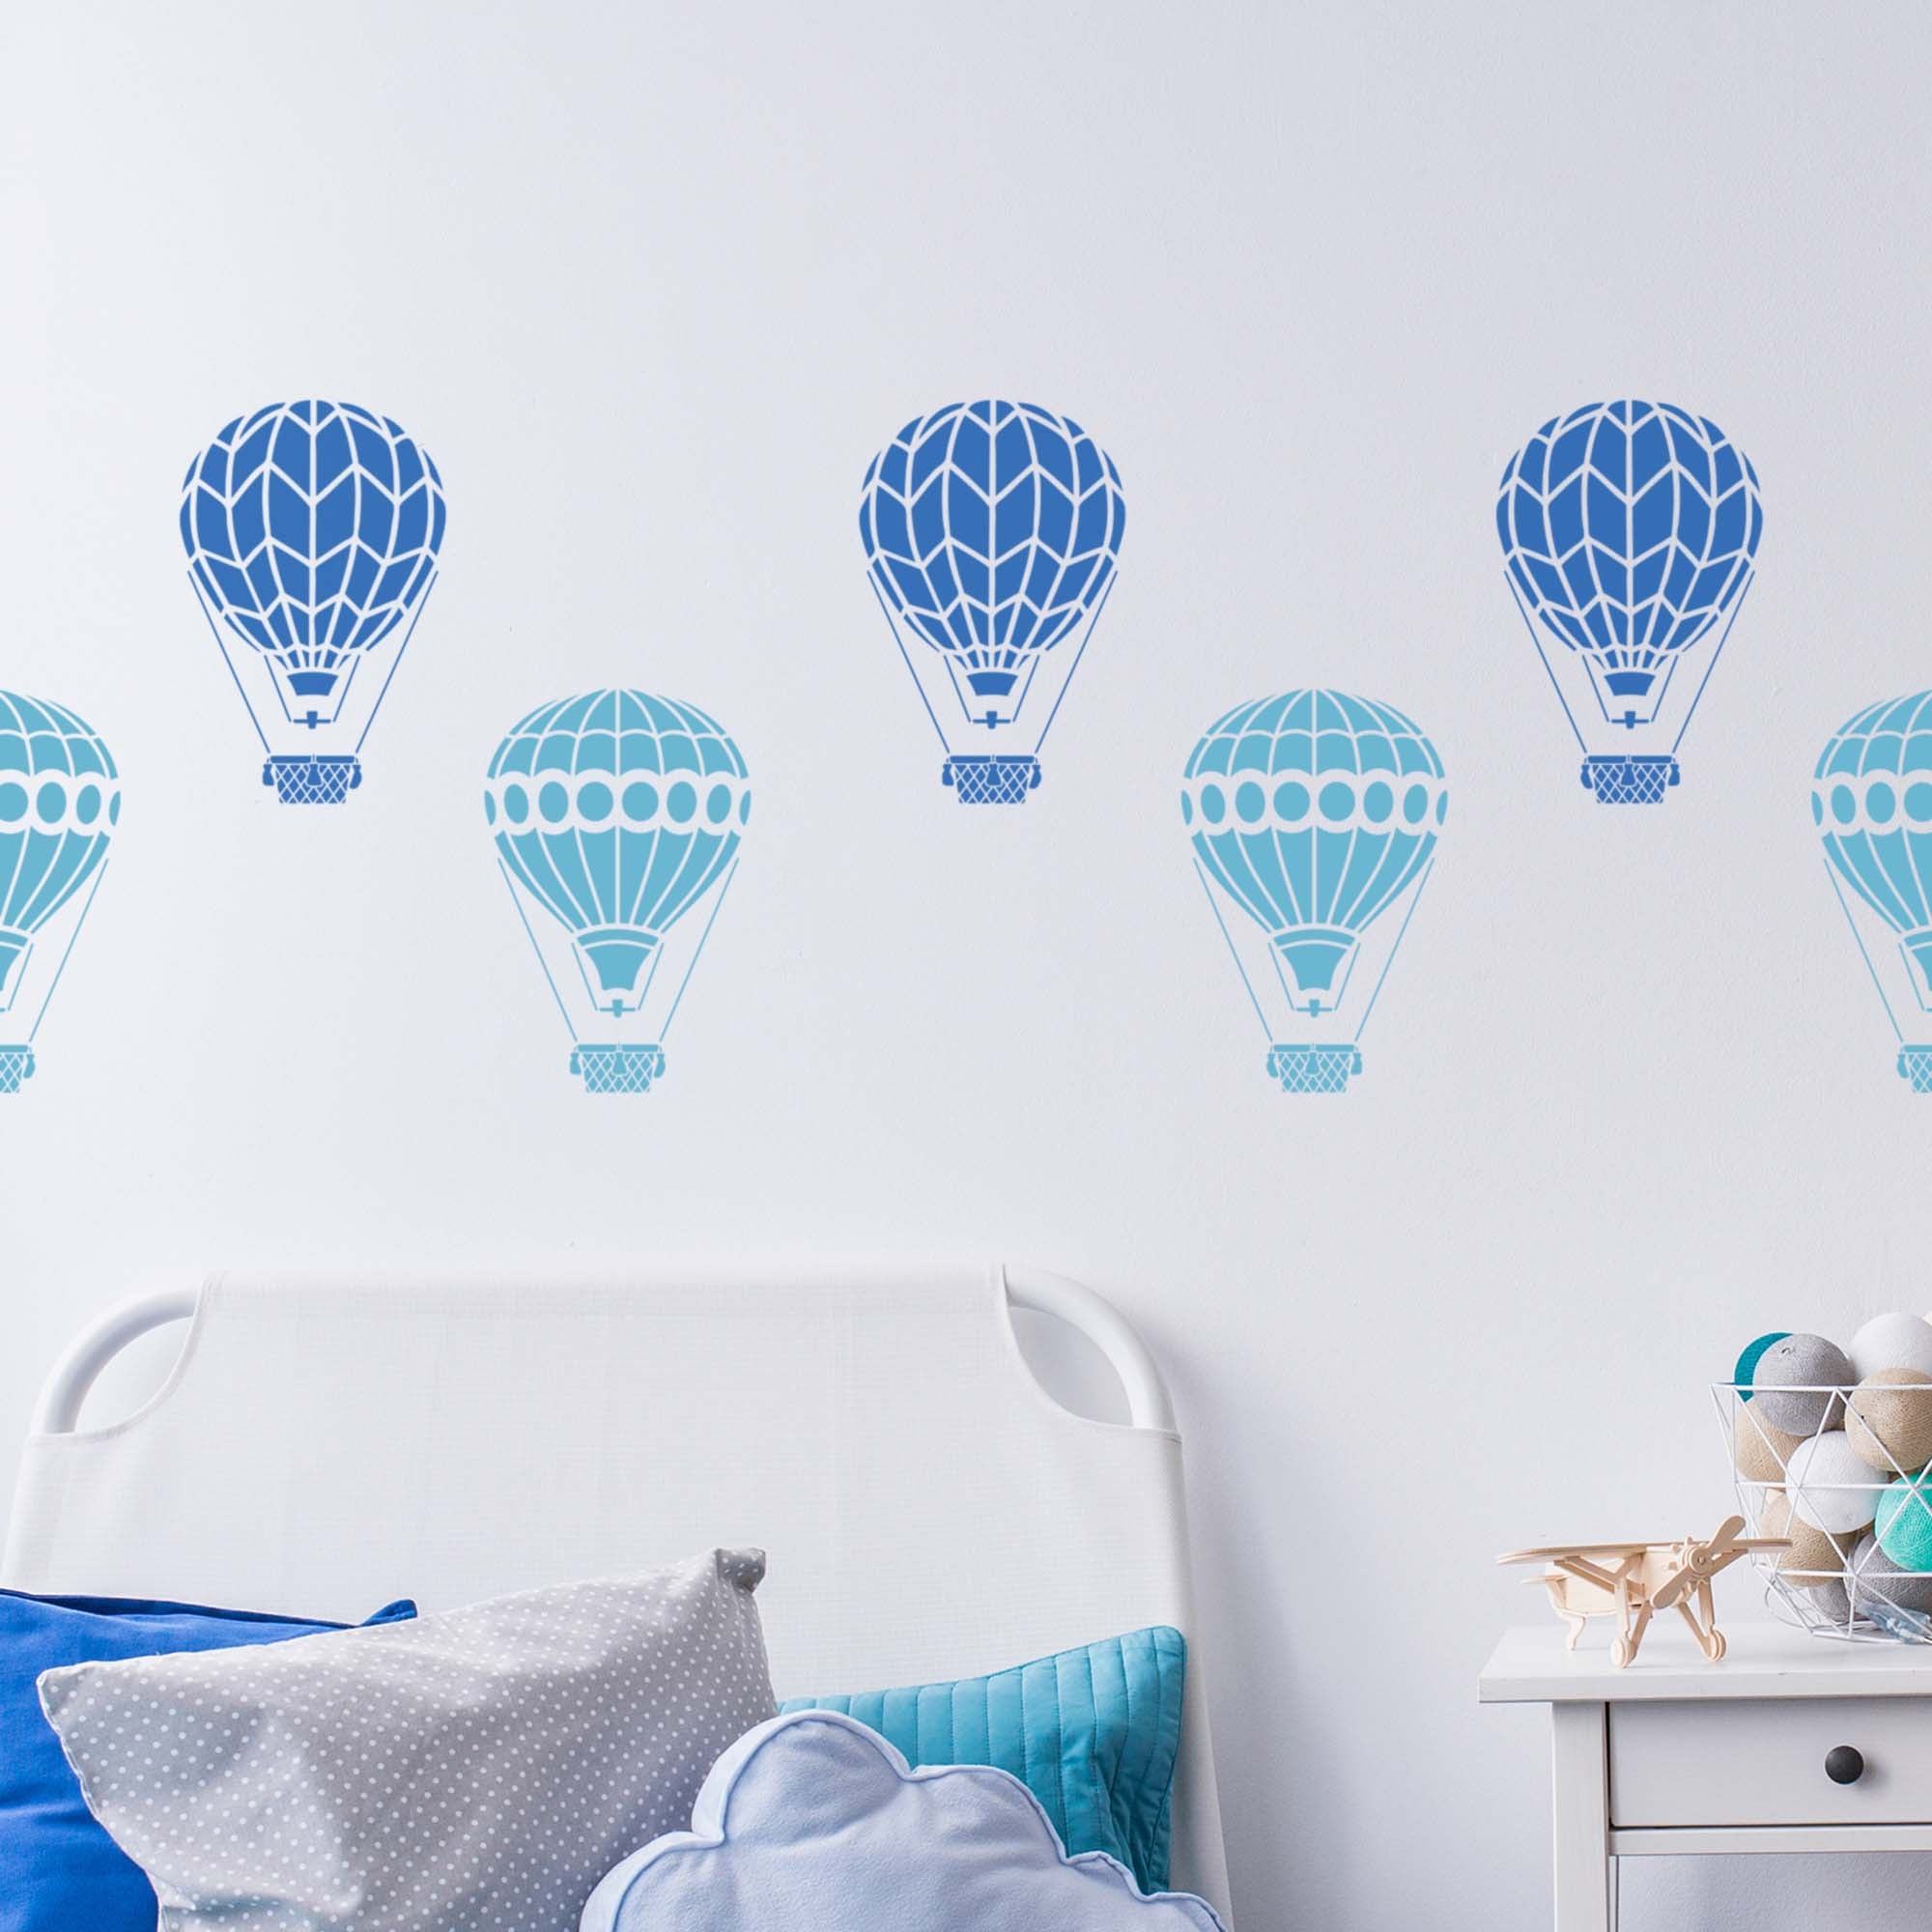 CraftStar Small Hot Air Balloon Stencil Set painted on kids bedroom wall